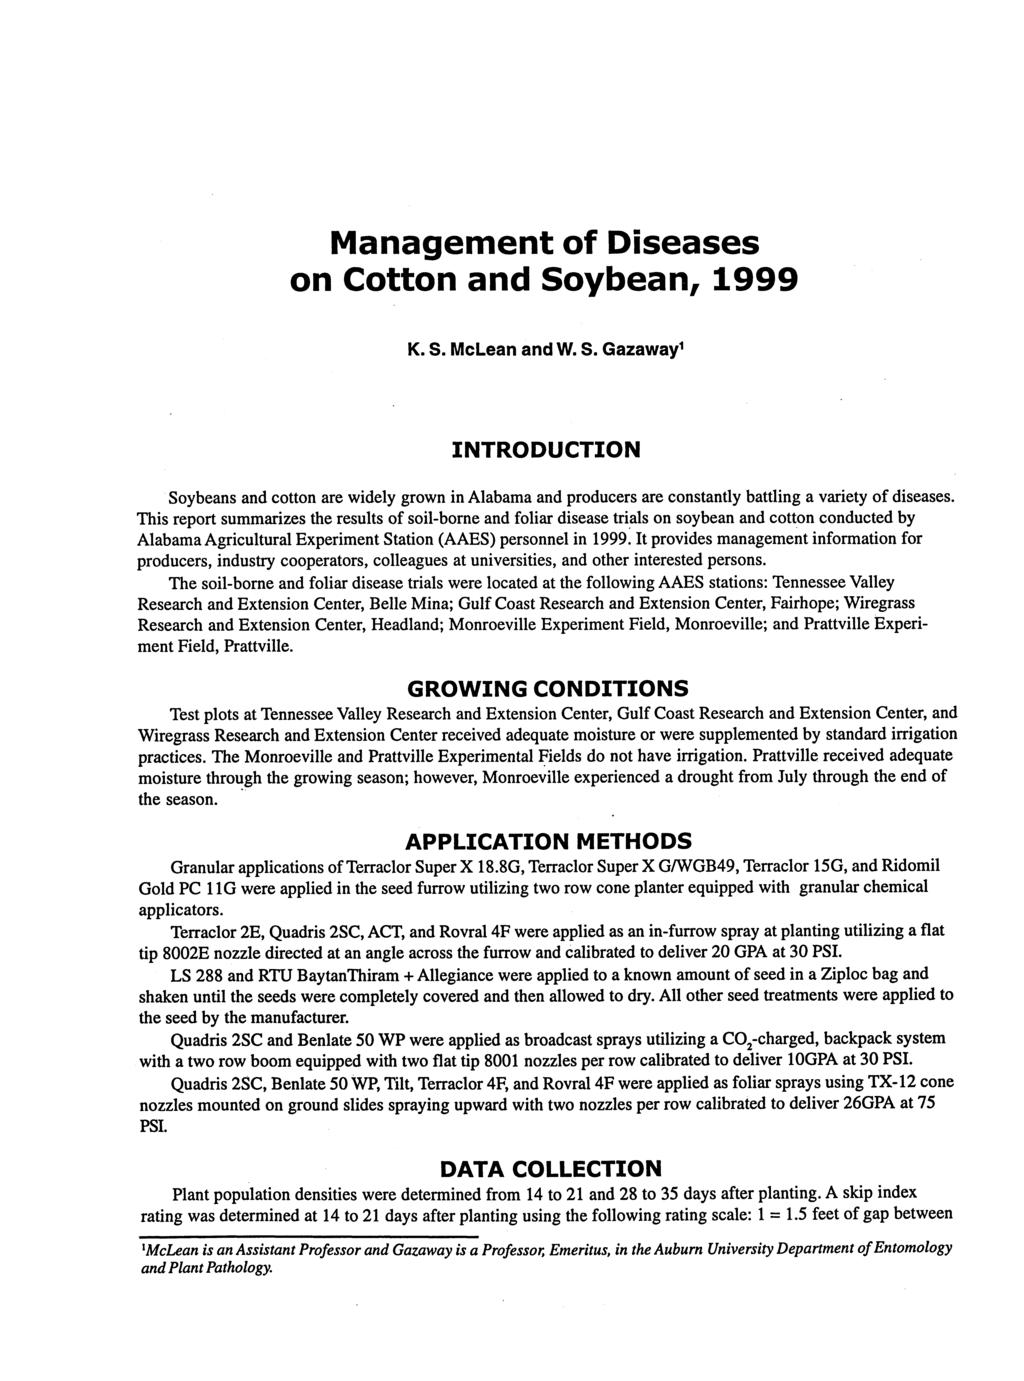 Management of Diseases on Cotton and Soybean, 1999 K. S. McLean and W. S. Gazaway' INTRODUCTION Soybeans and cotton are widely grown in Alabama and producers are constantly battling a variety of diseases.